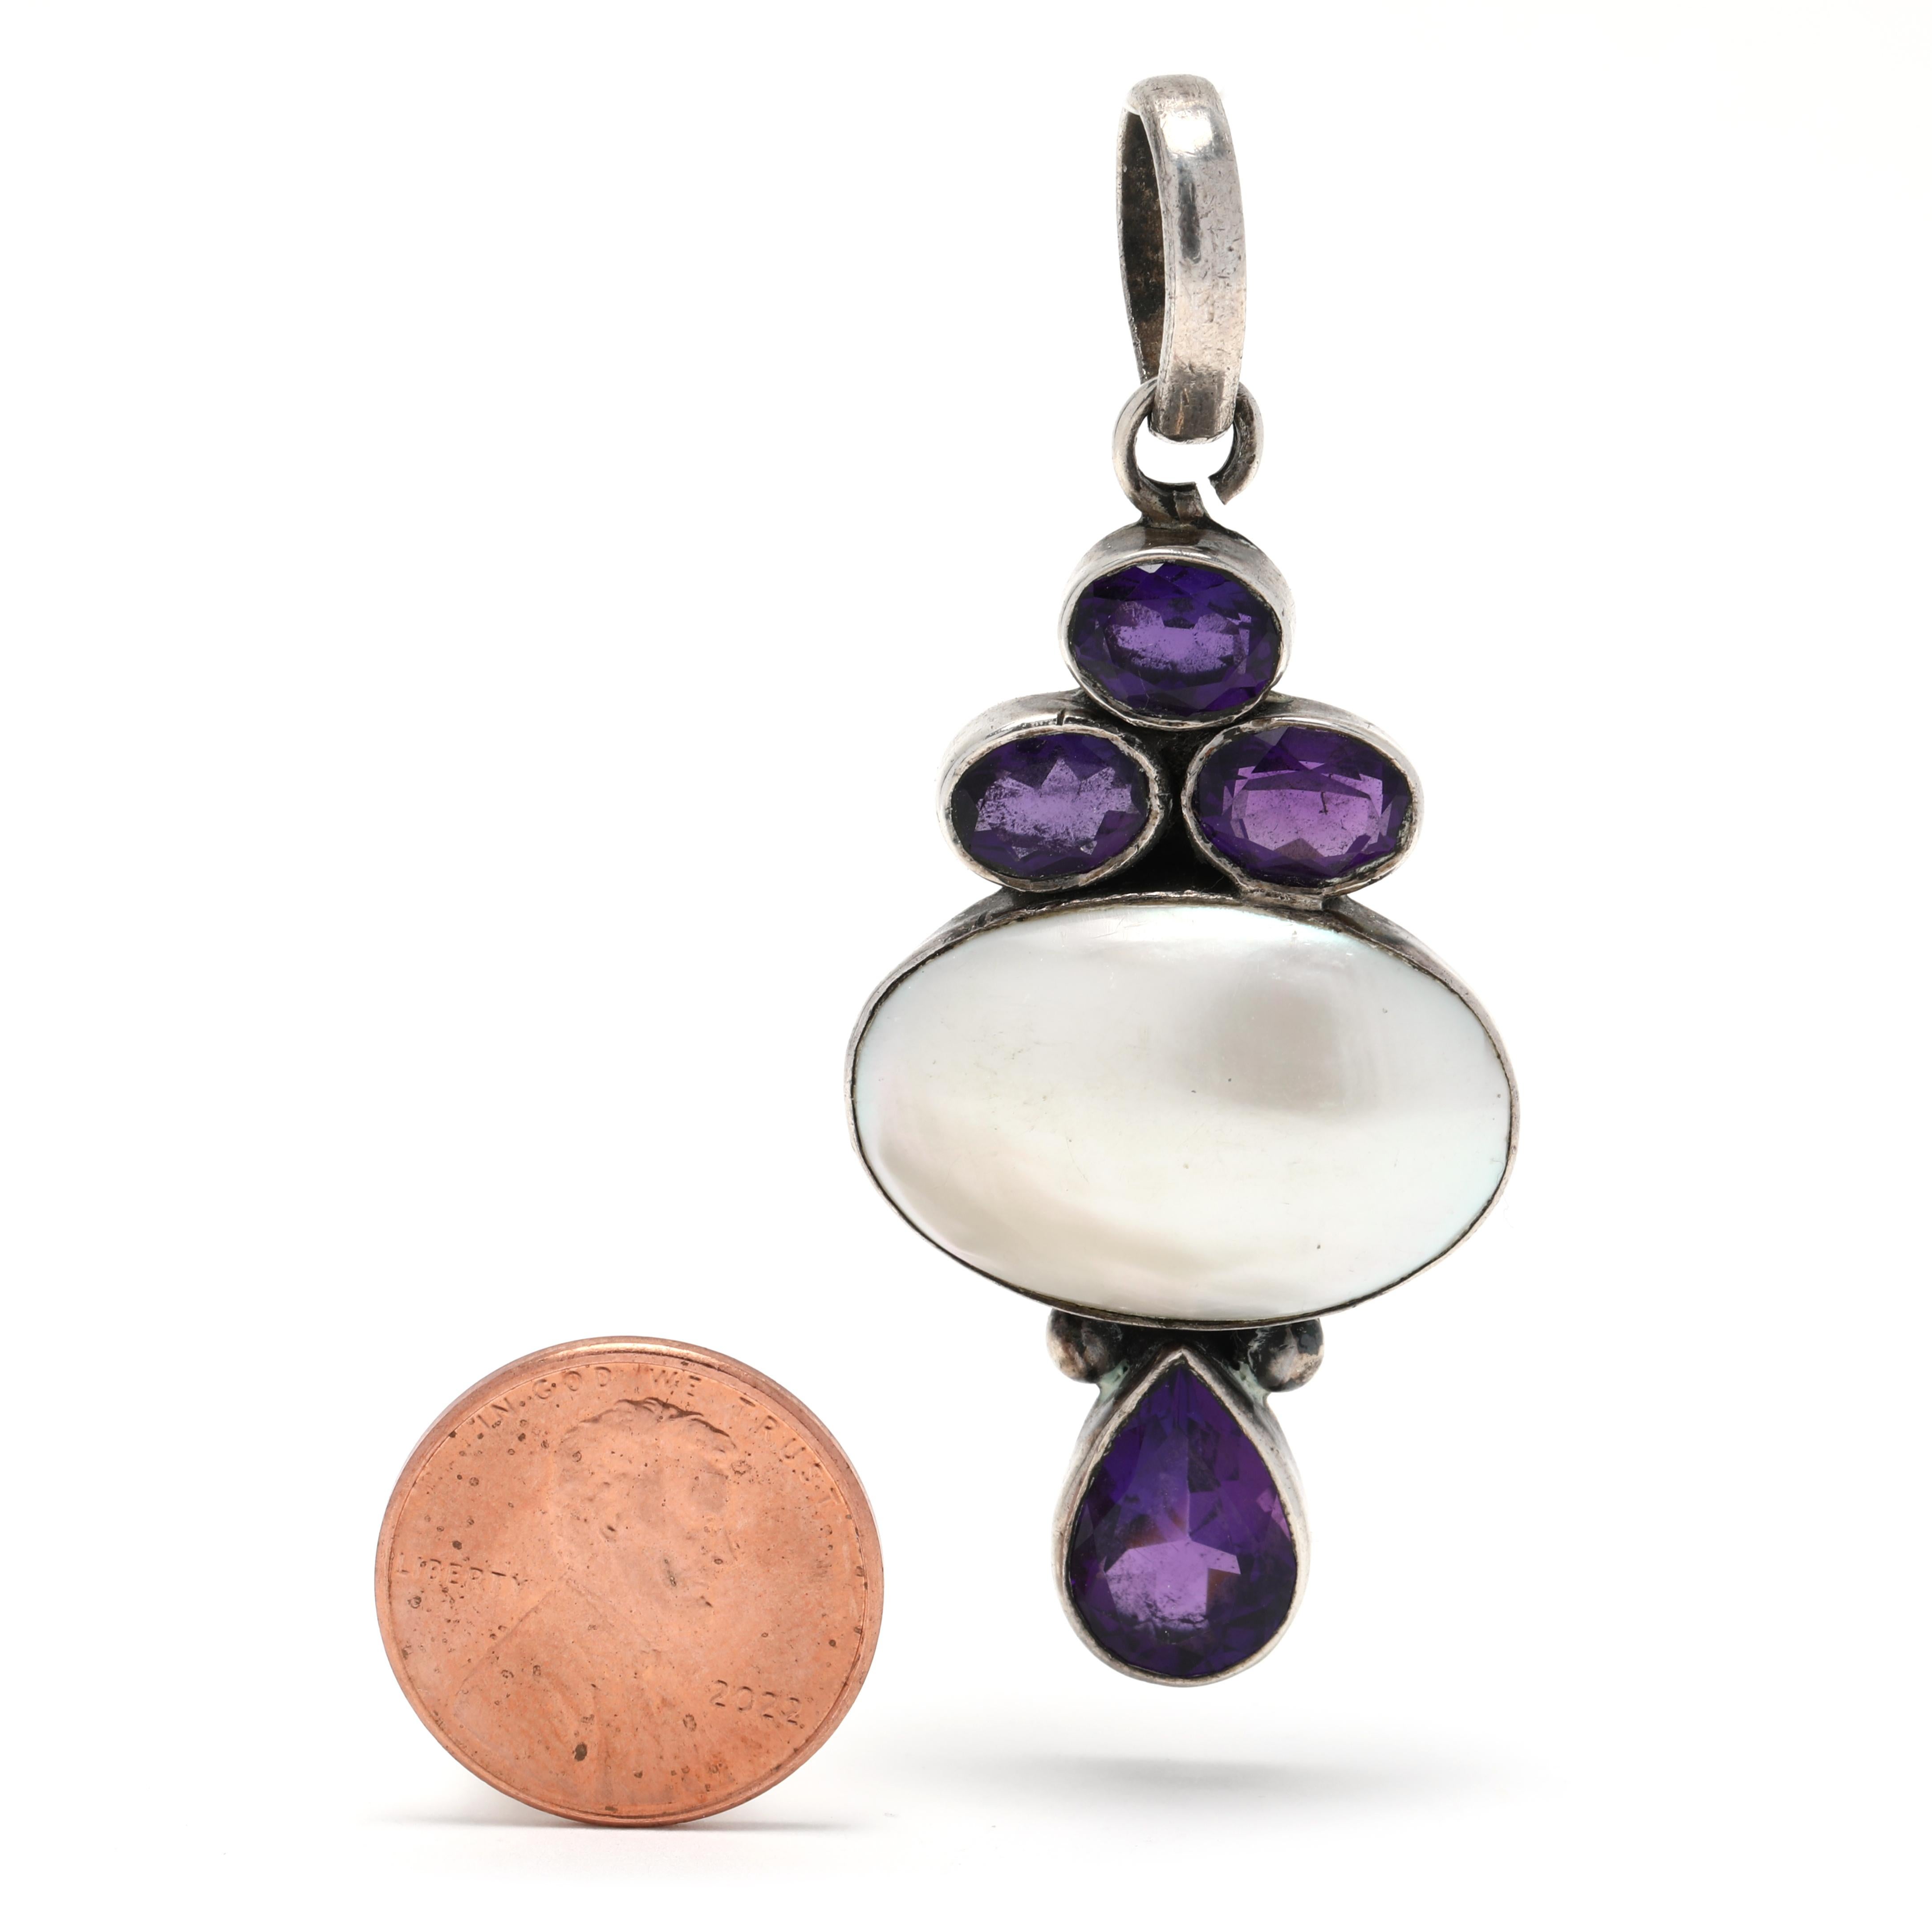 This stunning vintage pendant is crafted in sterling silver and showcases a 3ctw amethyst and mabé pearl. The large mabé pearl is suspended from an intricate sterling silver setting and hangs 2.5 inches long. This eye-catching piece is perfect for